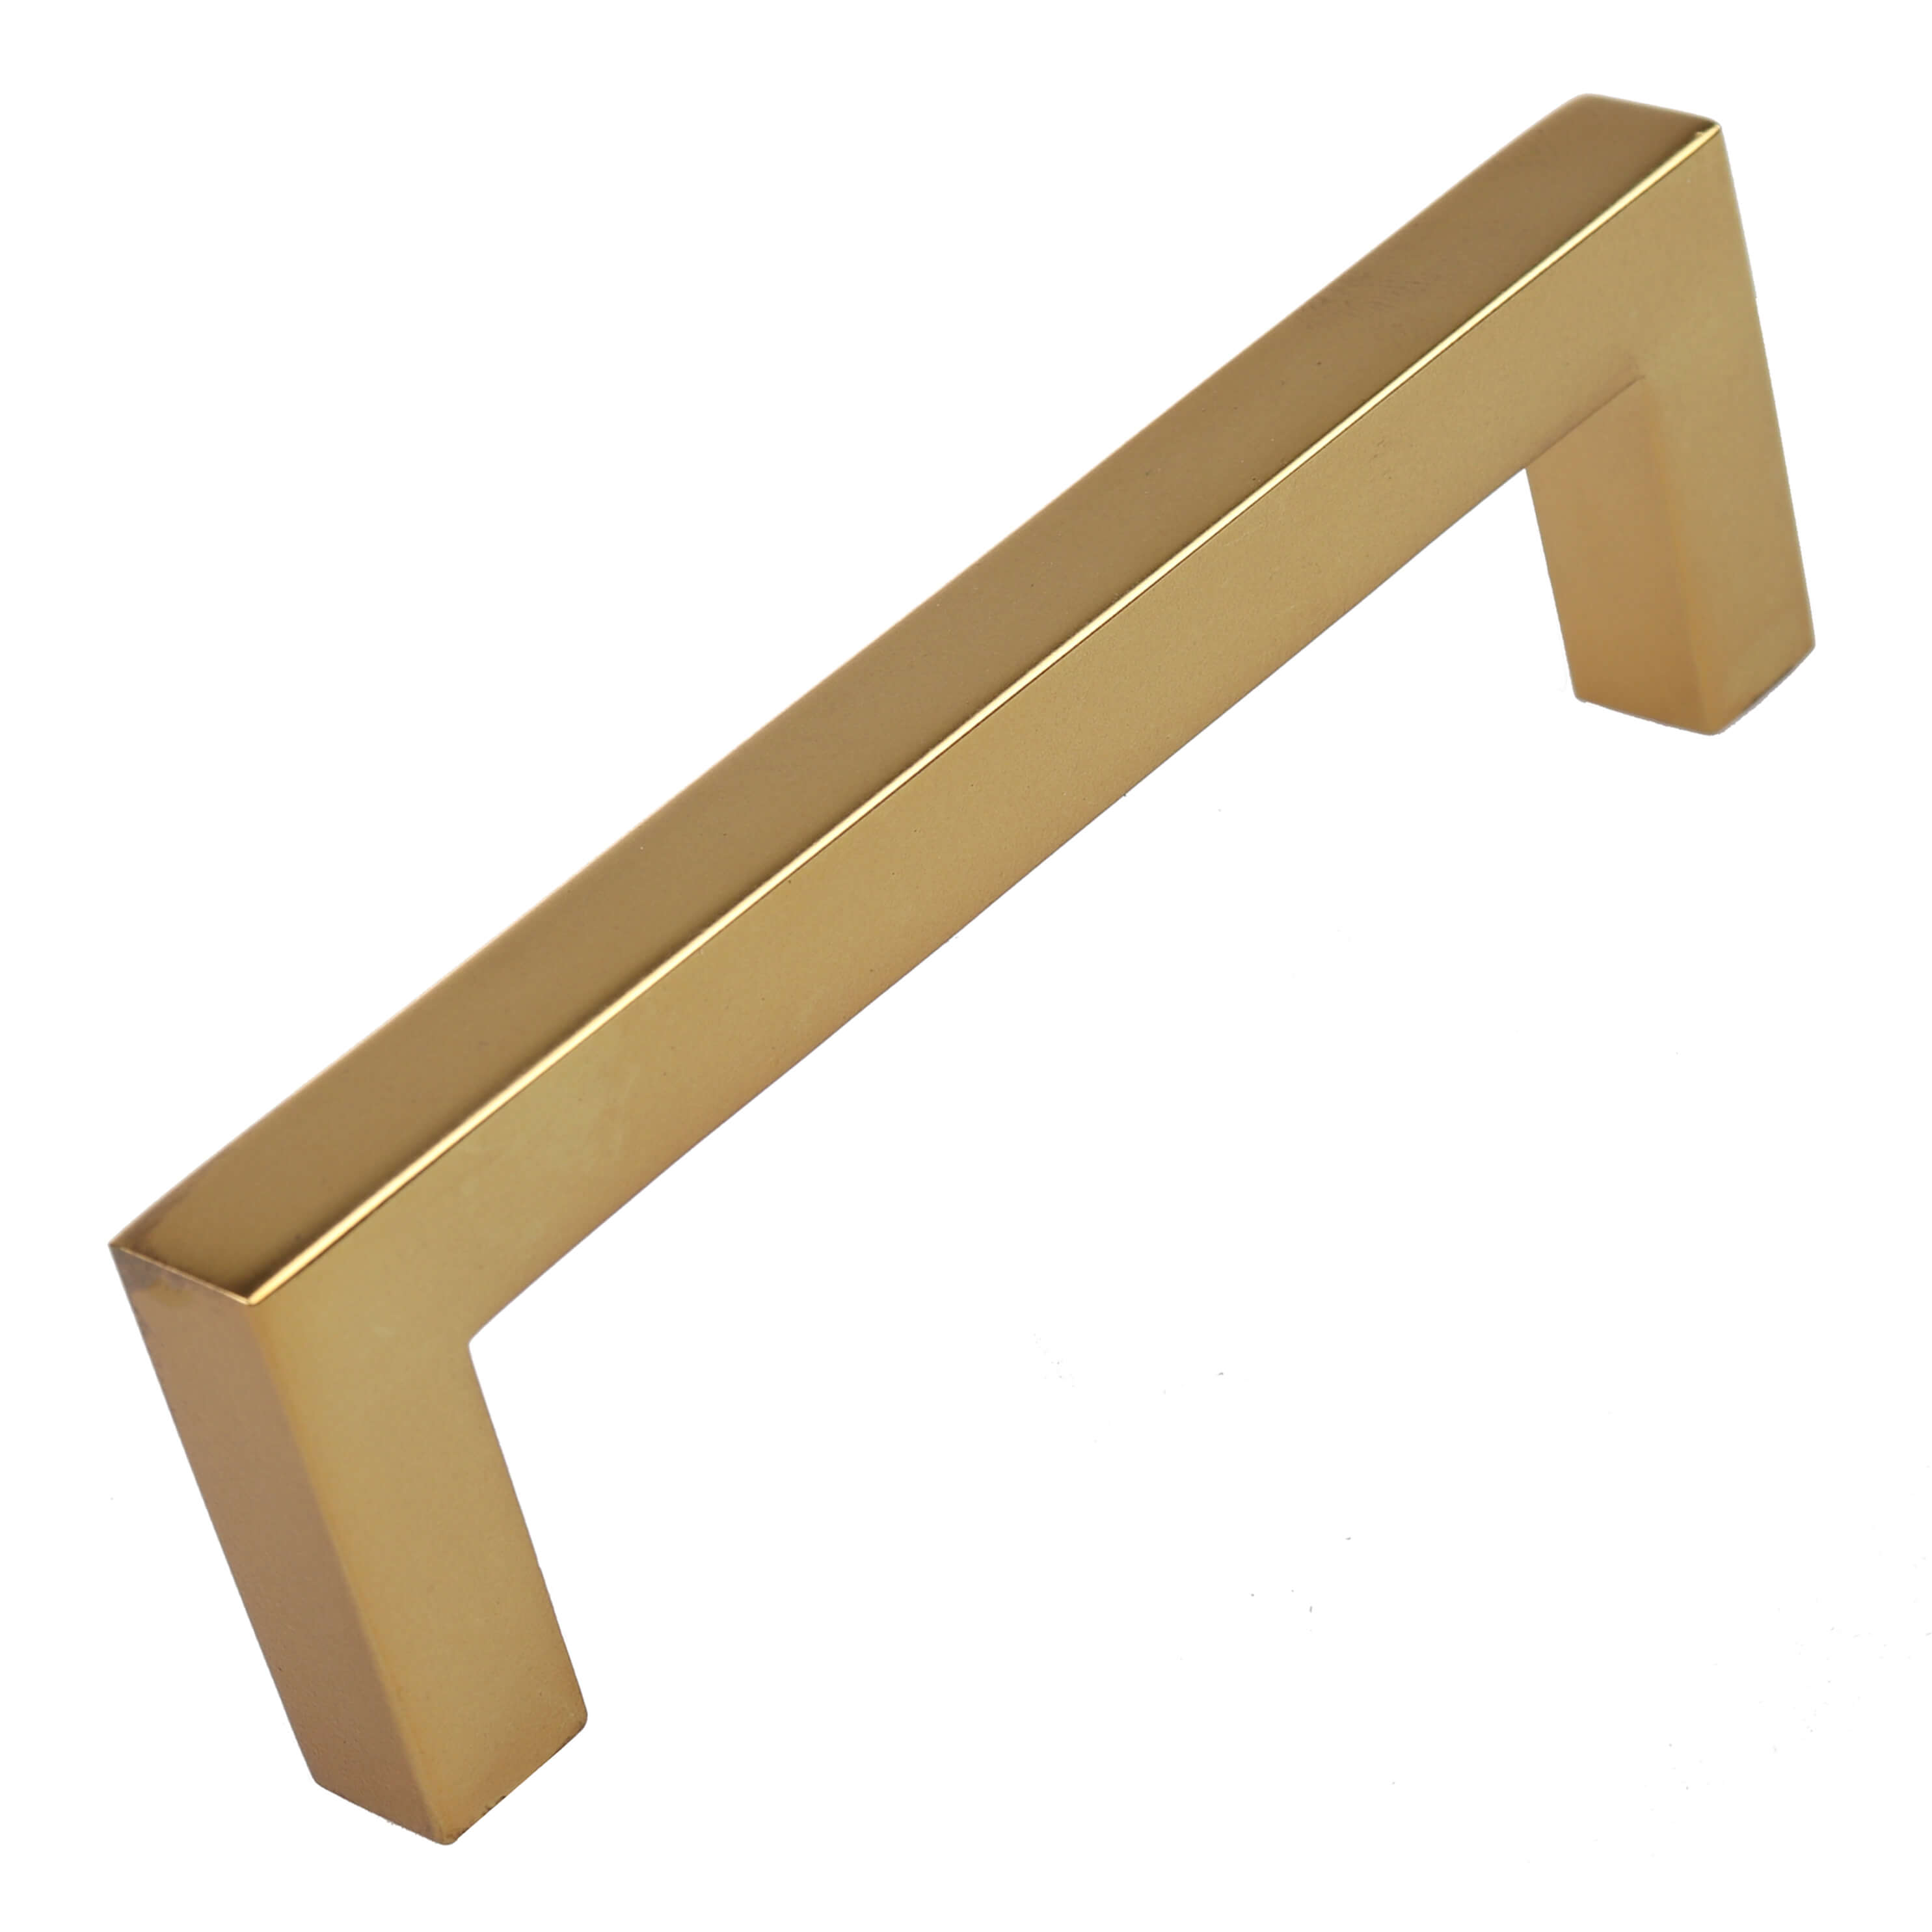 GlideRite 3-3/4 in. Center Solid Square Bar Cabinet Pulls, Brass Gold, Pack of 5 - image 1 of 3